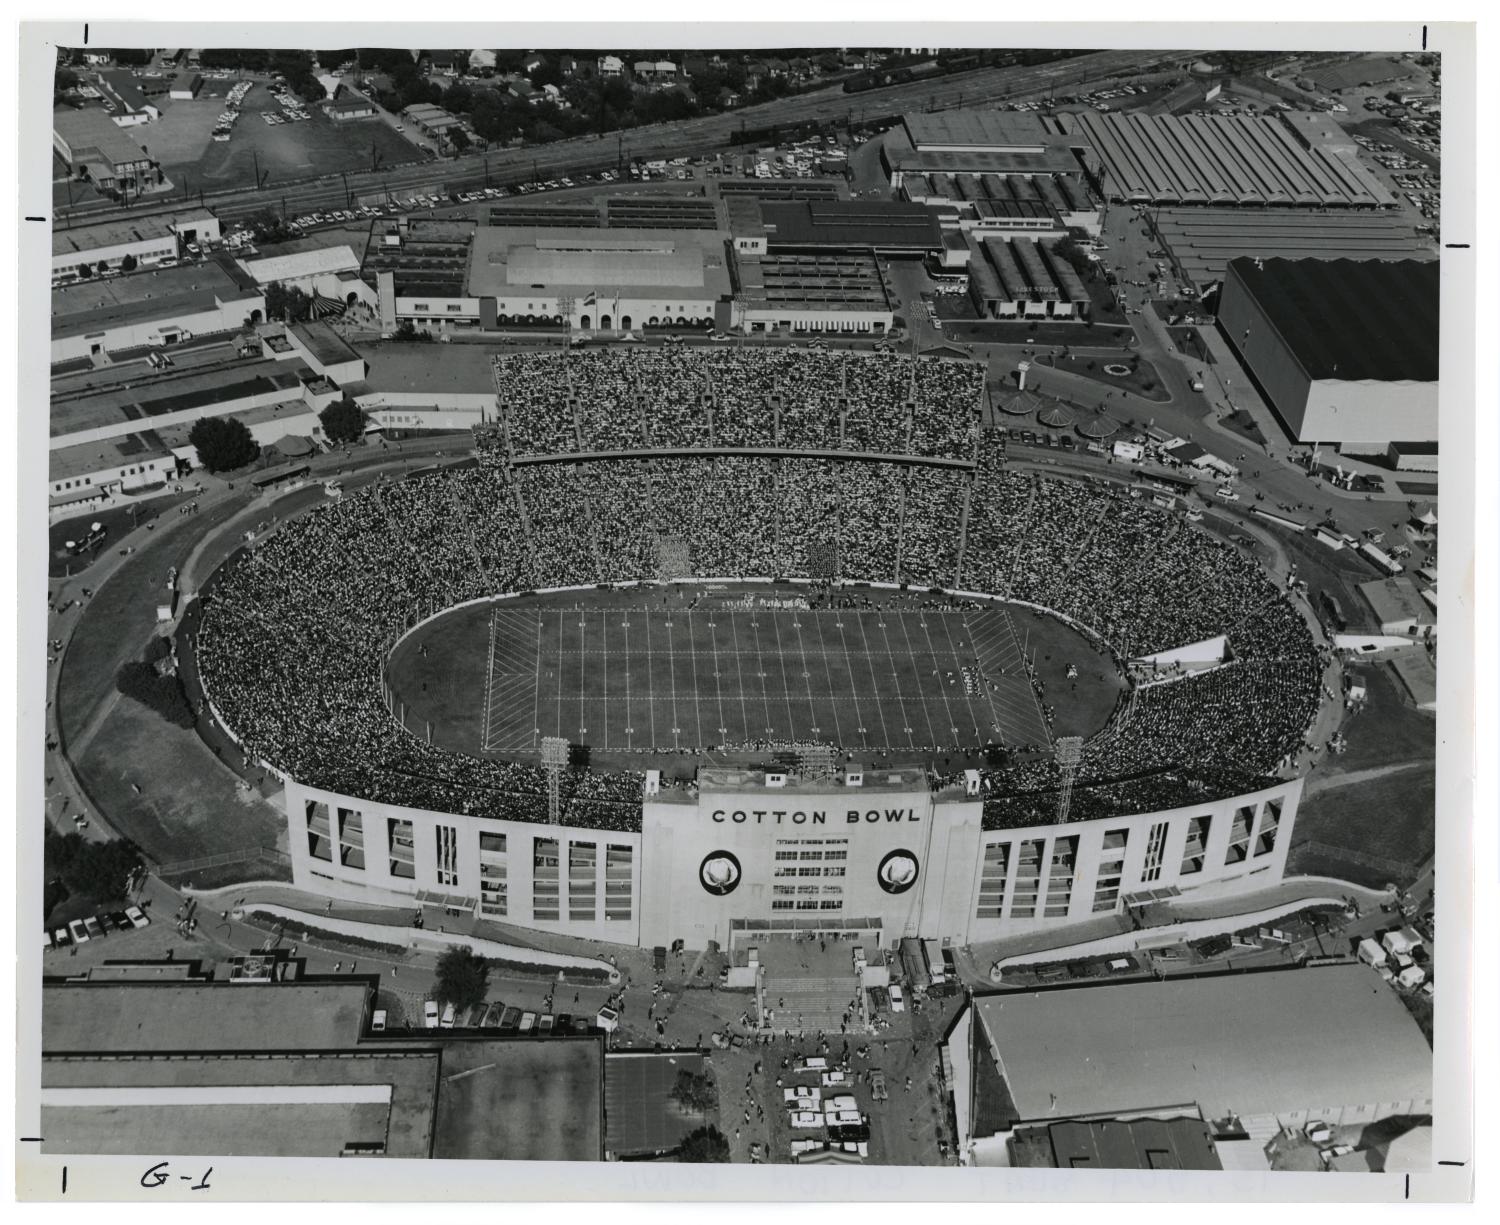 [Aerial view of the Cotton Bowl full of spectators] The Portal to